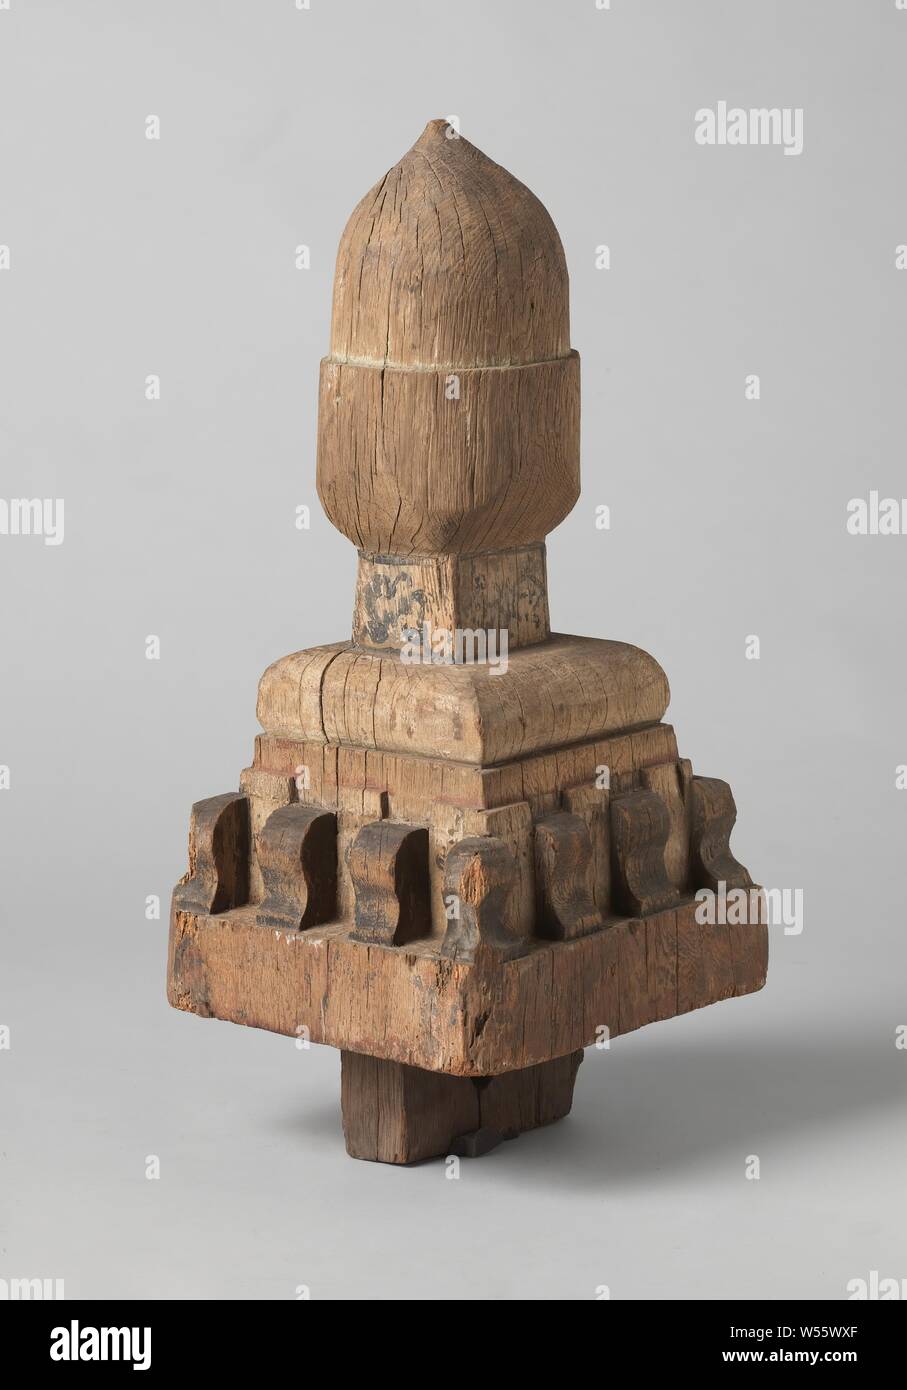 Dripper Made Of Wood Wooden Dripper In A Cornice Shape With A